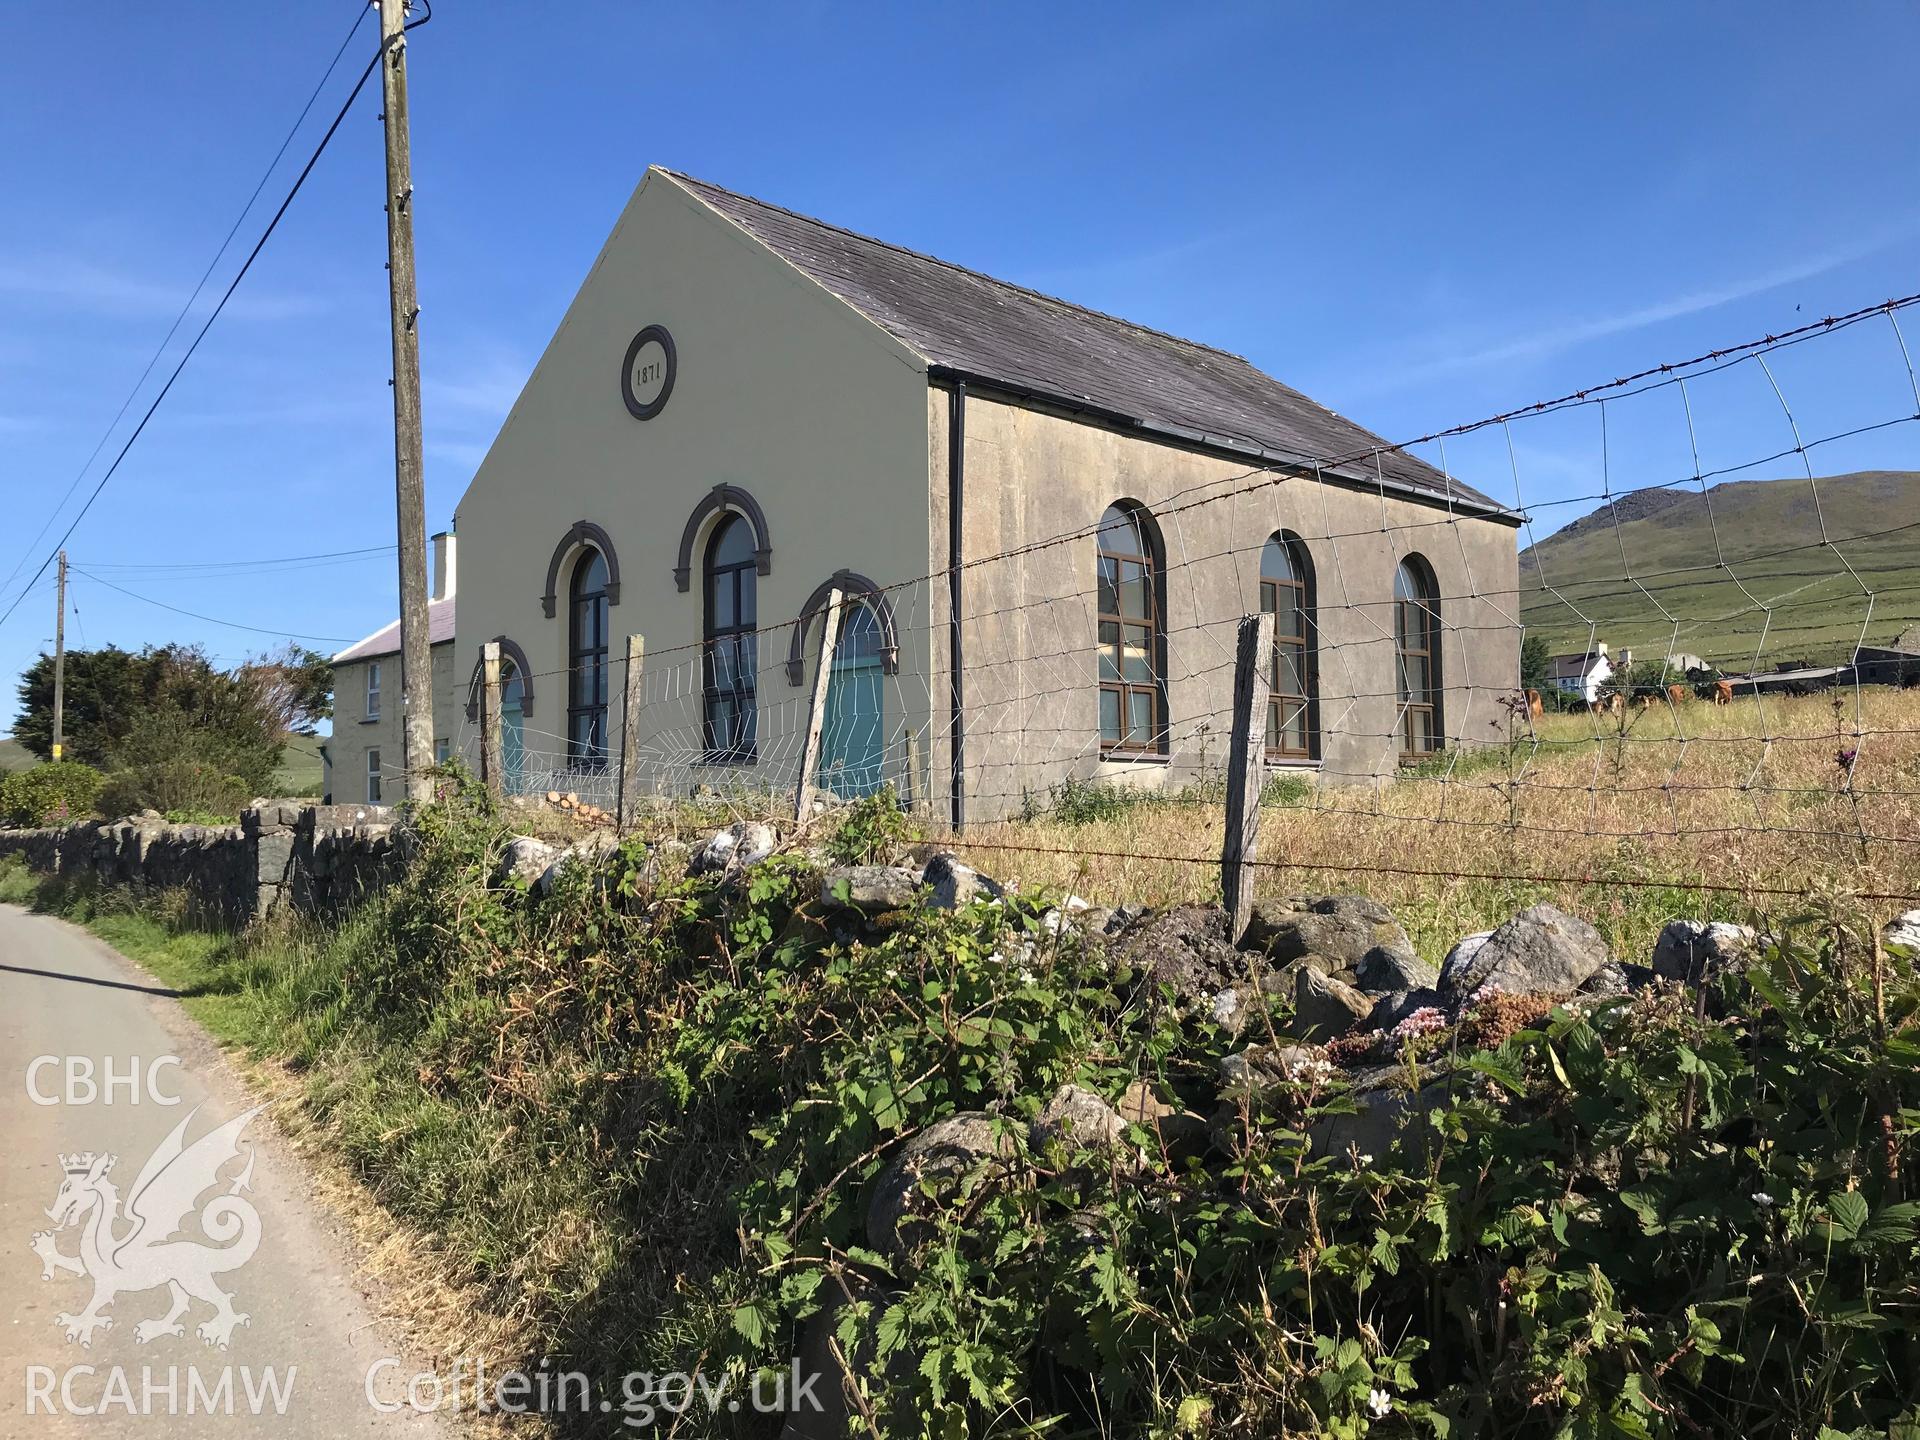 Colour photo showing exterior view of Cwmcoryn chapel, Llanaelhaearn, taken from the road by Paul R. Davis, 24th June 2018.